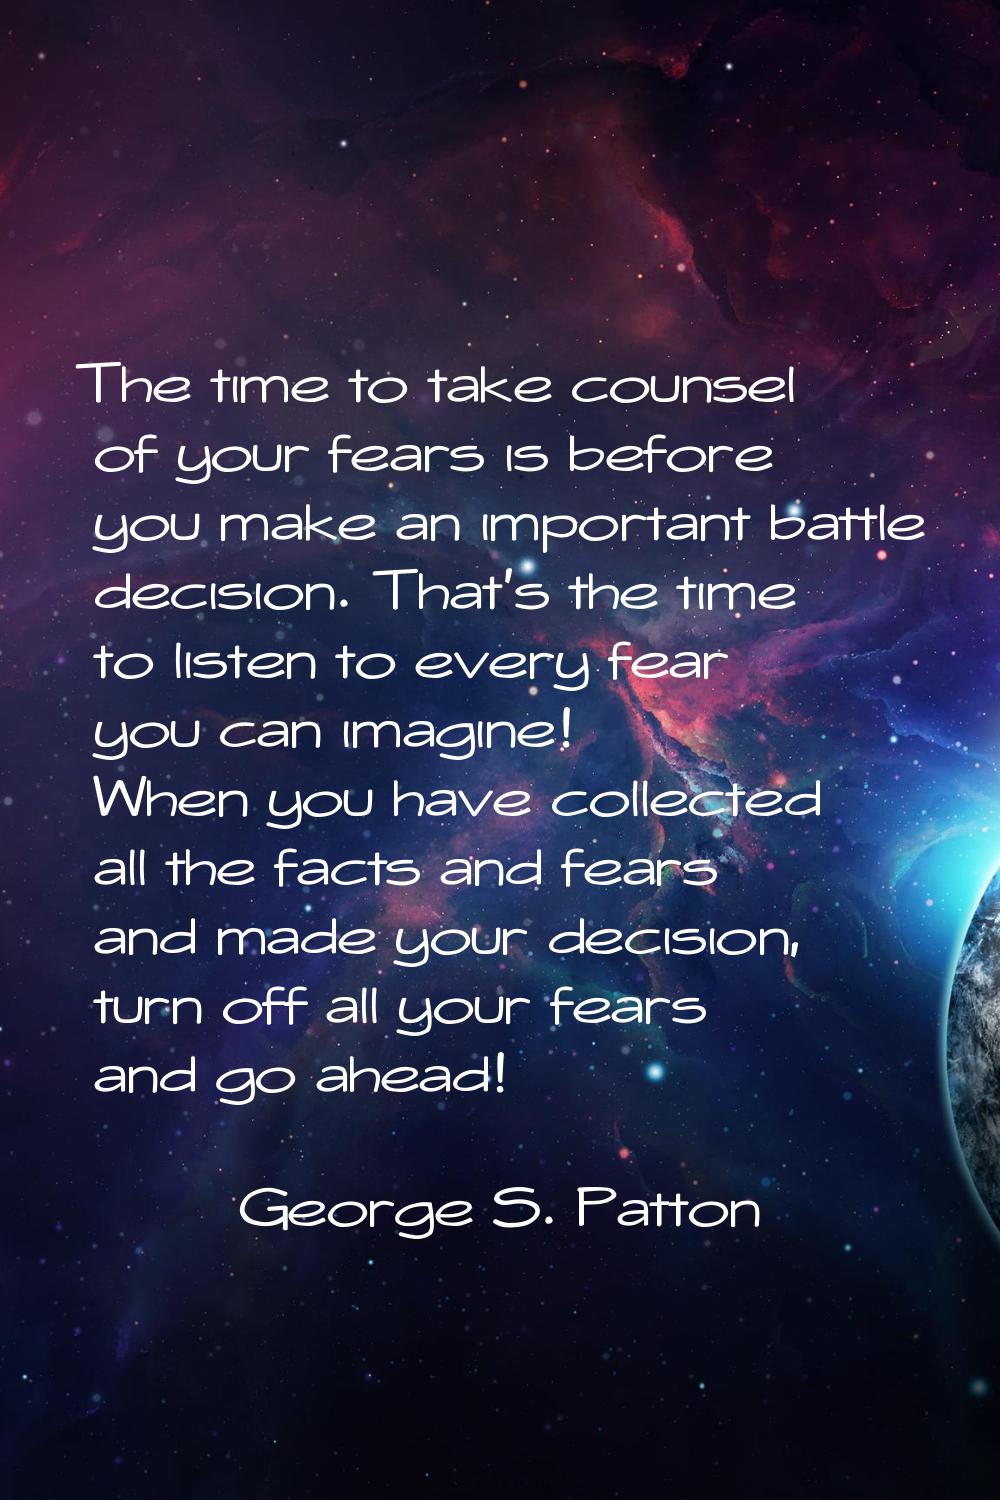 The time to take counsel of your fears is before you make an important battle decision. That's the 